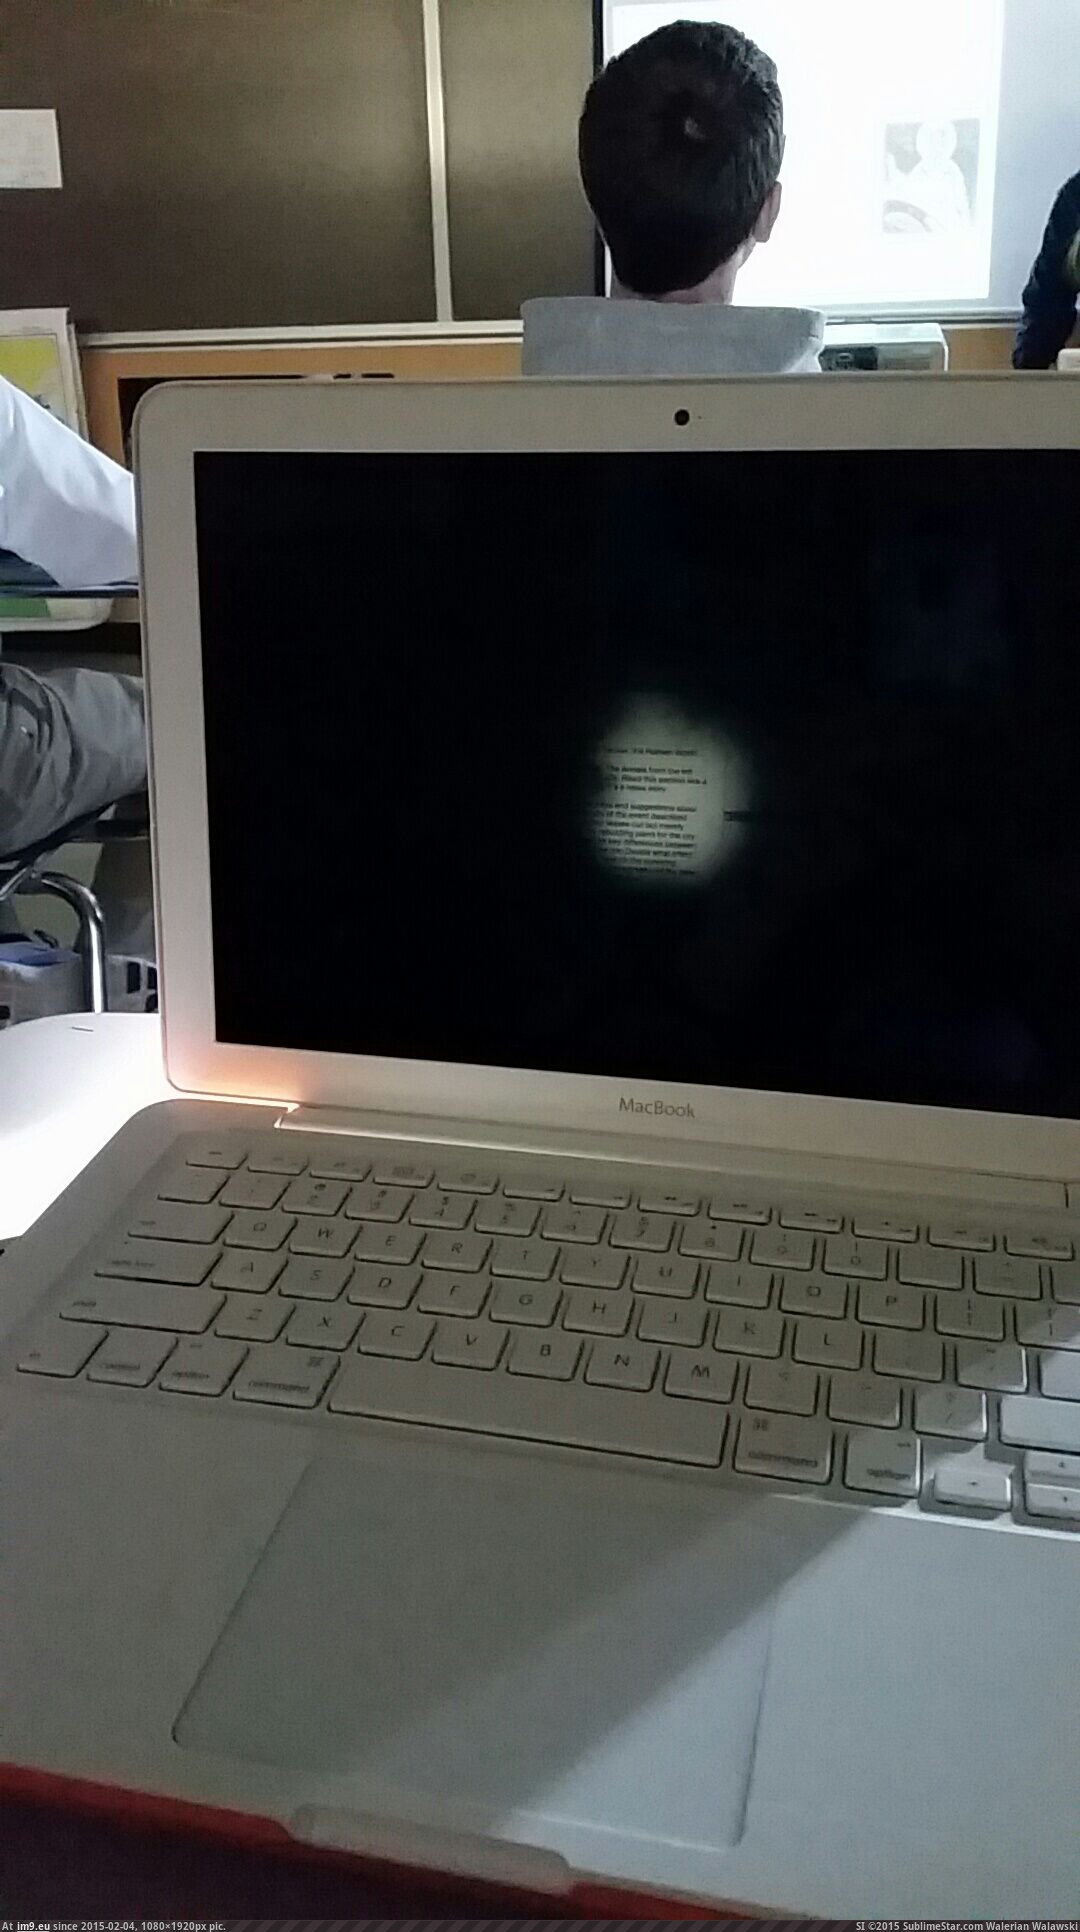 [Mildlyinteresting] Sun shined through the apple on the back of my laptop and lit up my screen (in My r/MILDLYINTERESTING favs)